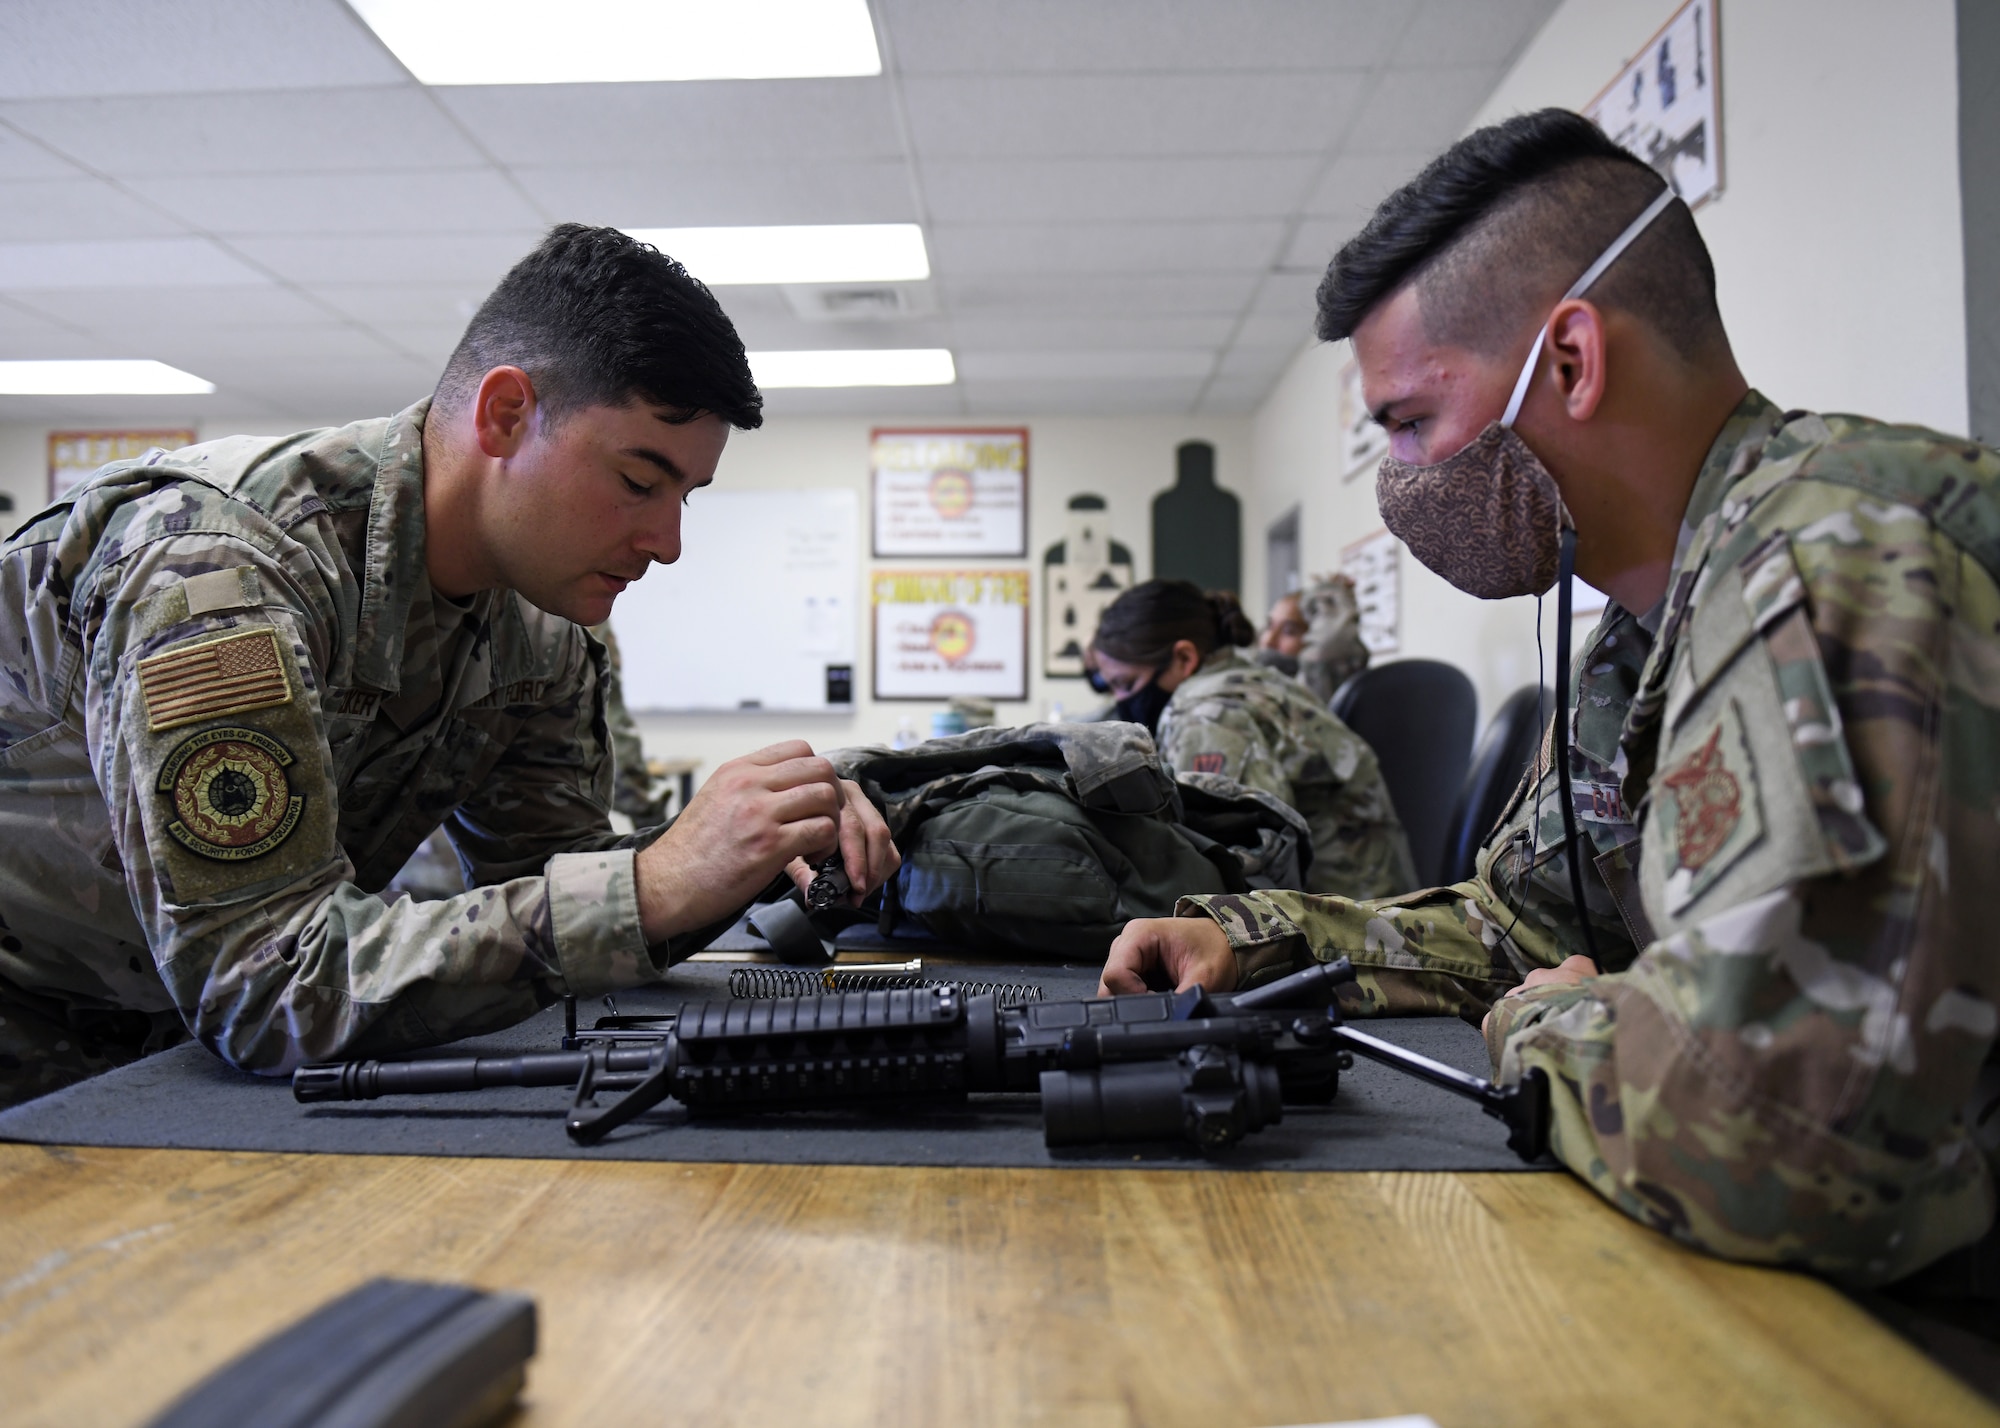 Tech. Sgt. Chad Choker, NCOIC of combat arms (left), assists a student during a Combat Arms Training and Maintenance course, June 22, 2020, at Beale Air Force Base, California. CATM instructors teach Airmen how to properly use, disassemble, and clean a weapon safely. (U.S. Air Force photo by Airman 1st Class Luis A. Ruiz-Vazquez)